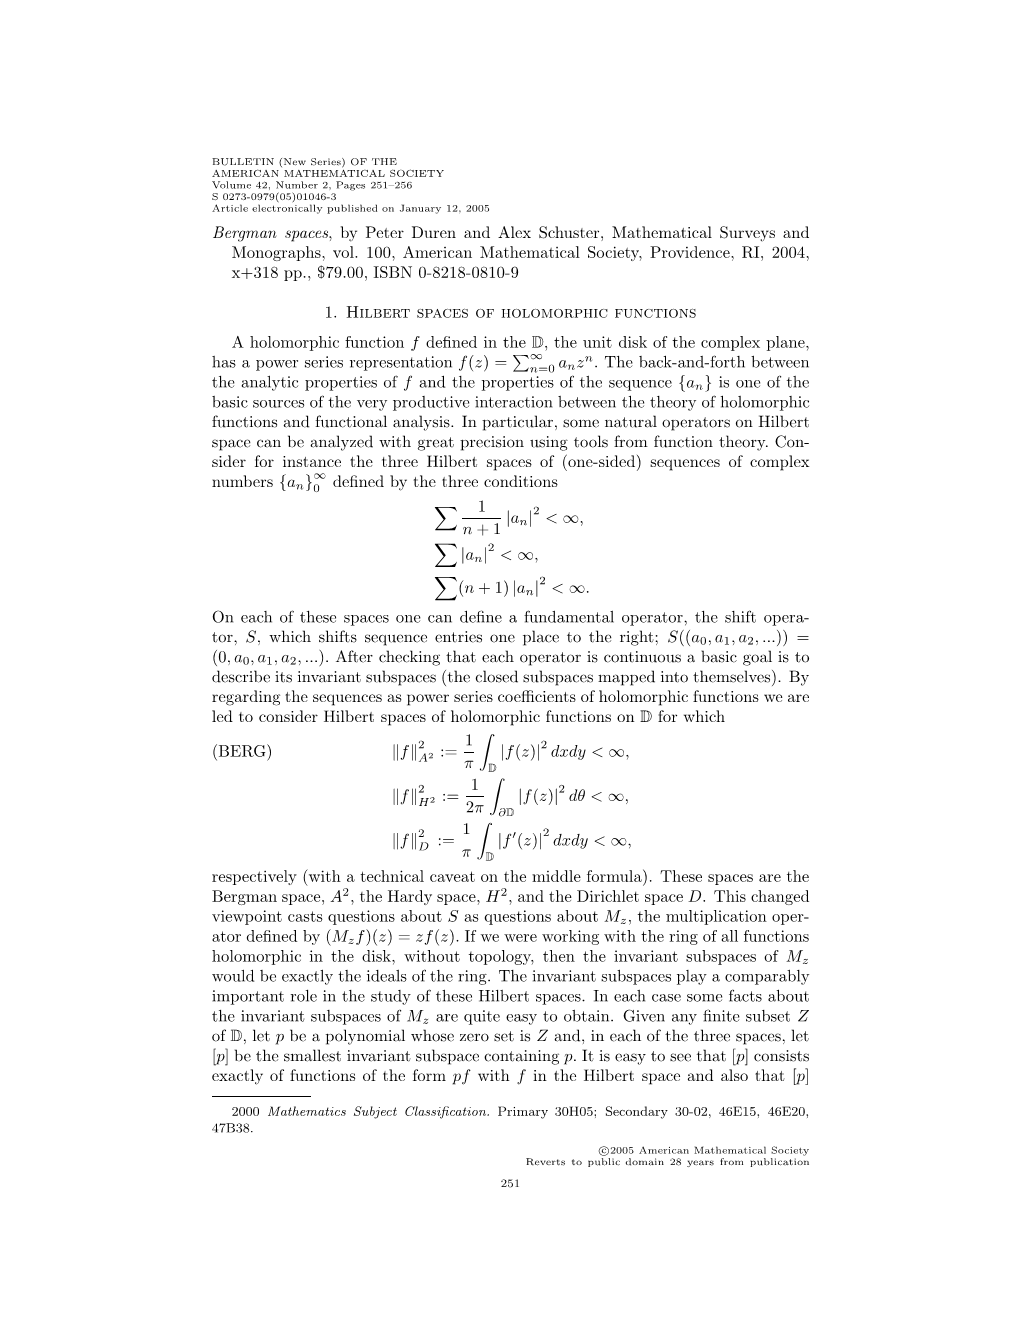 Bergman Spaces, by Peter Duren and Alex Schuster, Mathematical Surveys and Monographs, Vol. 100, American Mathematical Society